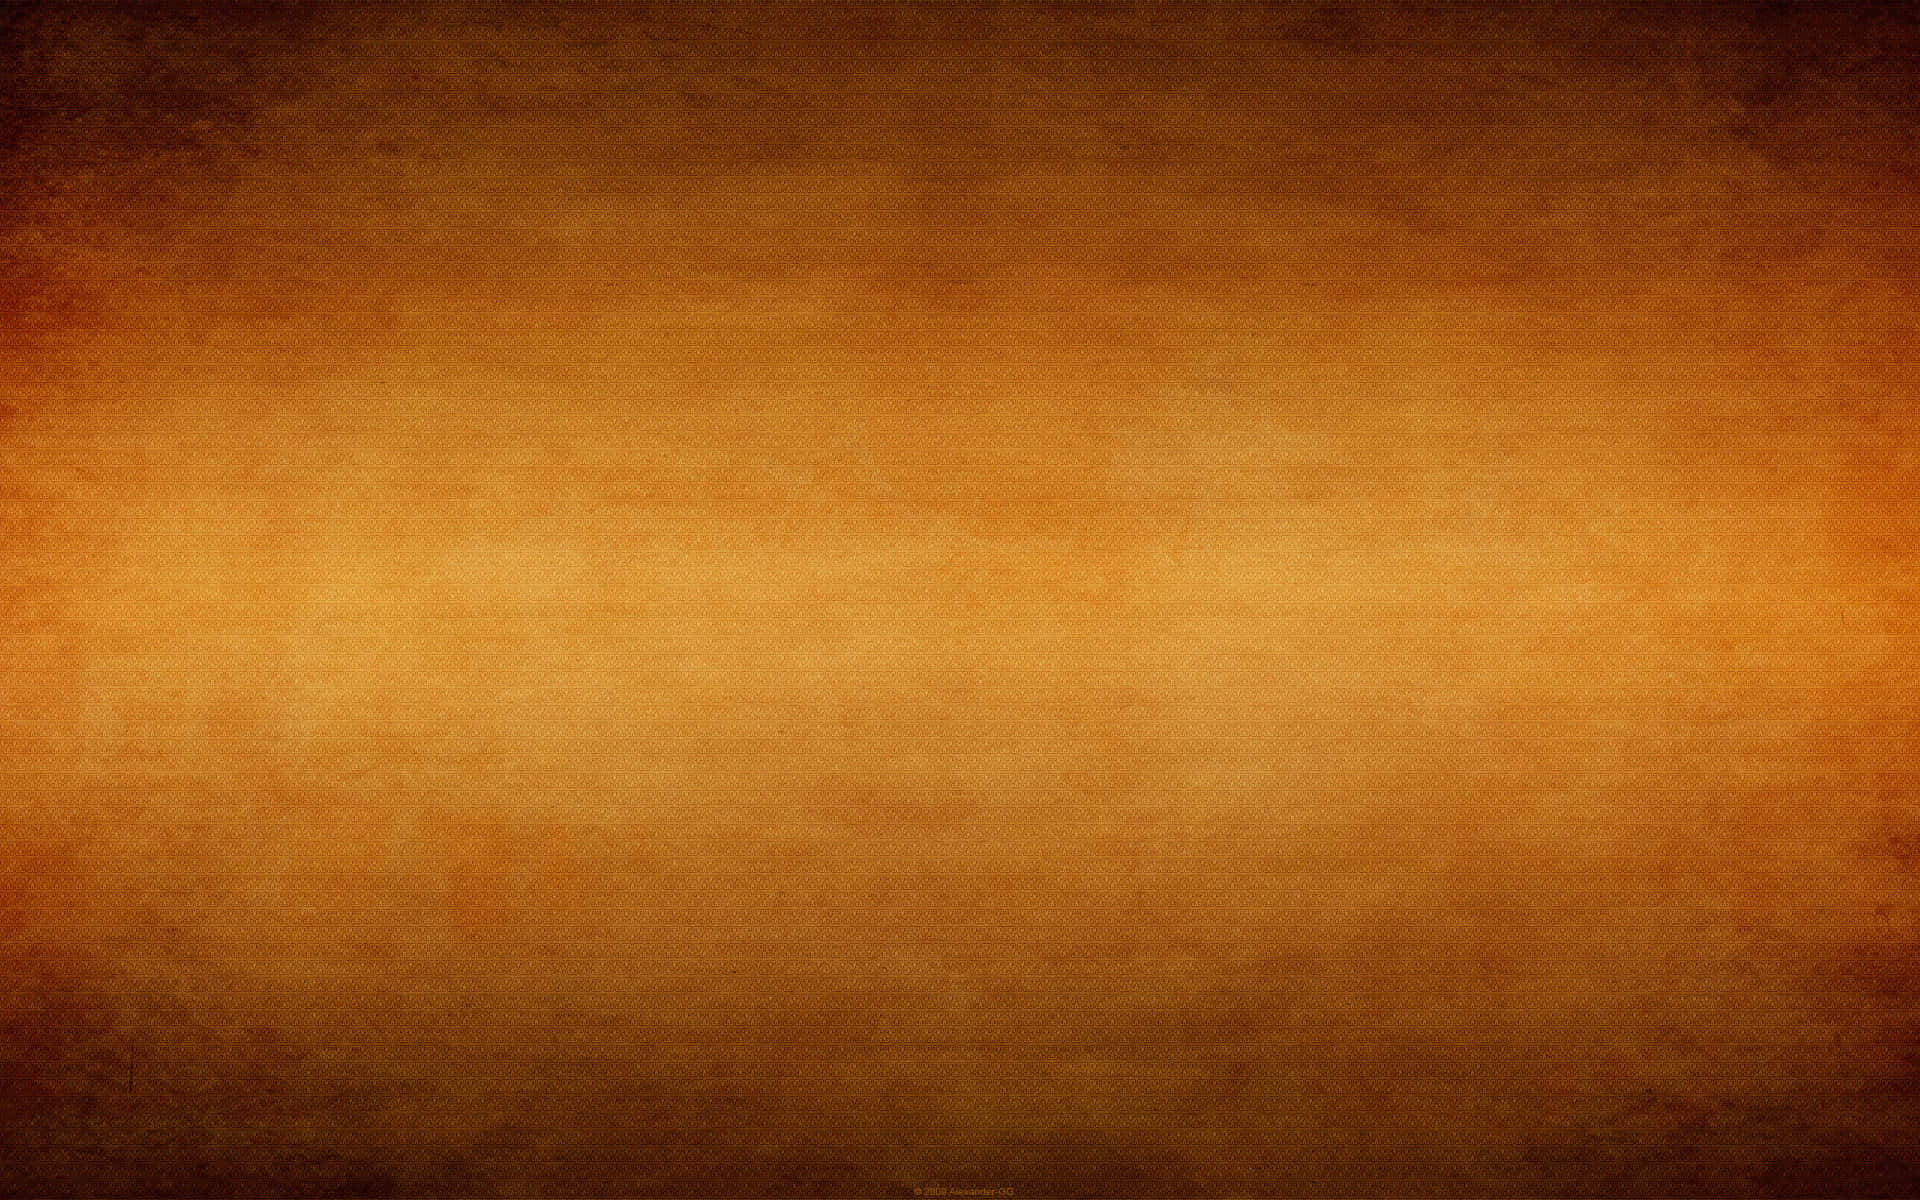 A Brown Background With A Light Brown Color